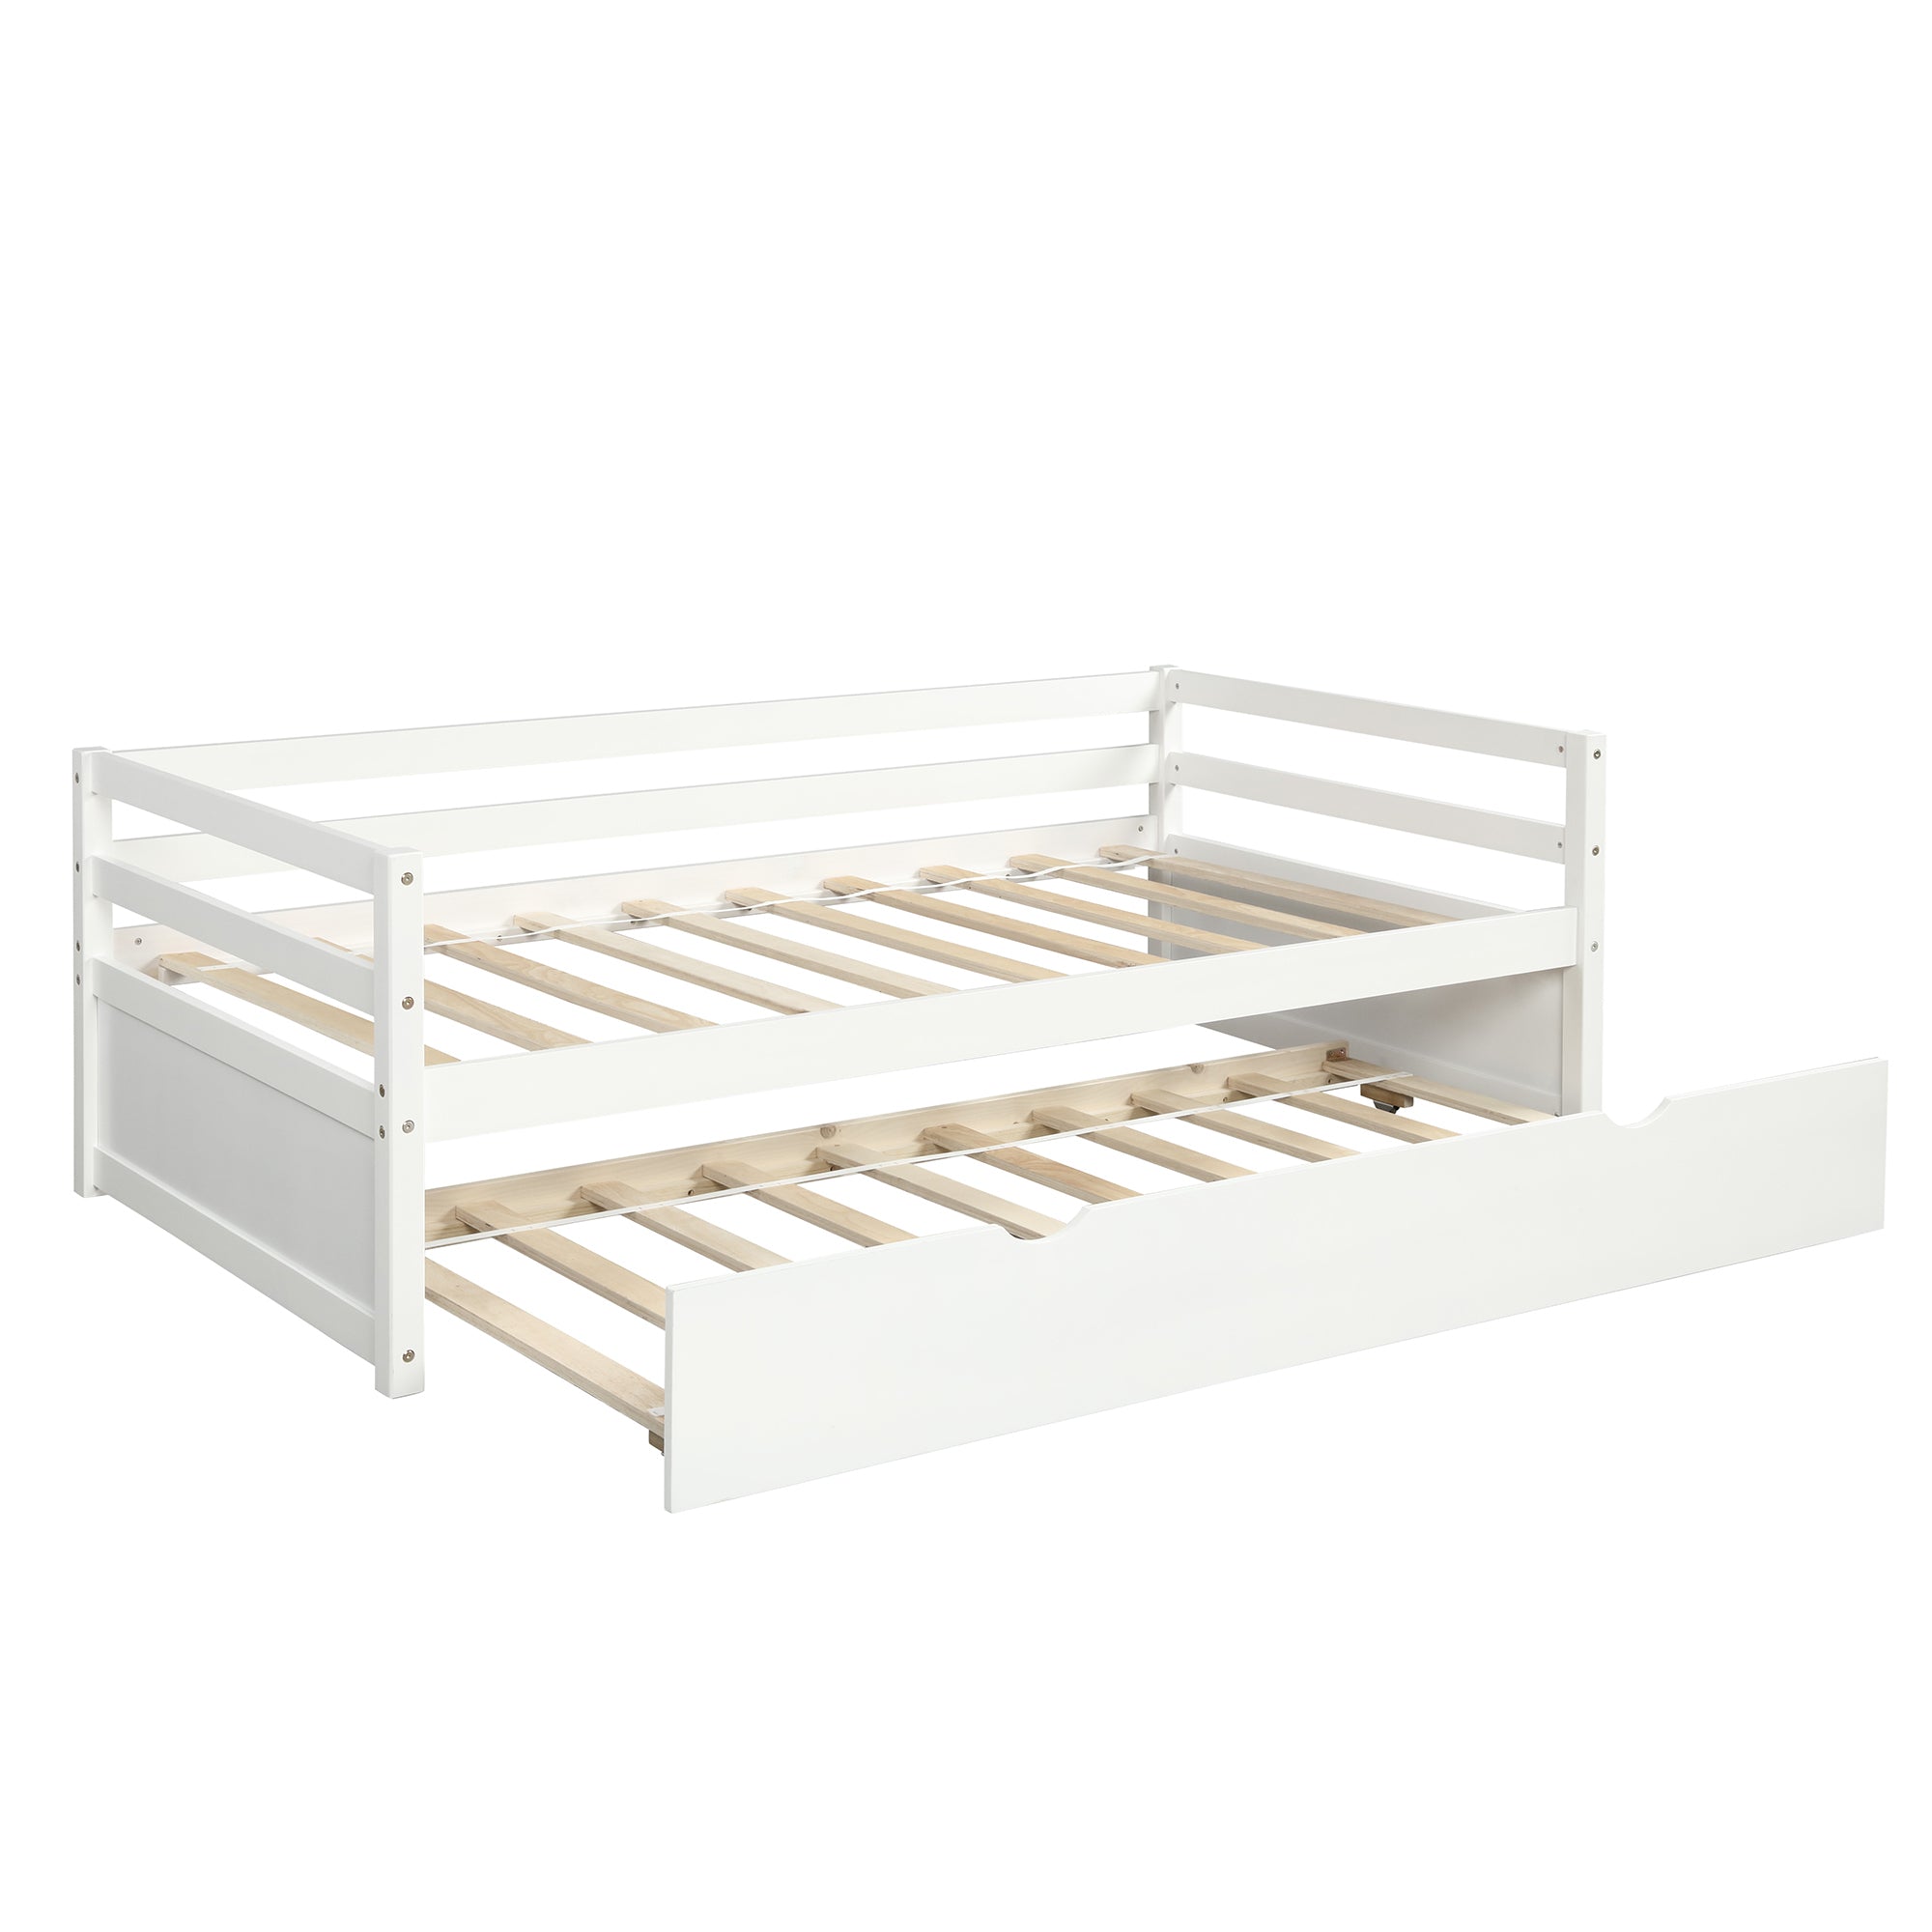 Daybed with Trundle Frame Set Twin Size (White)